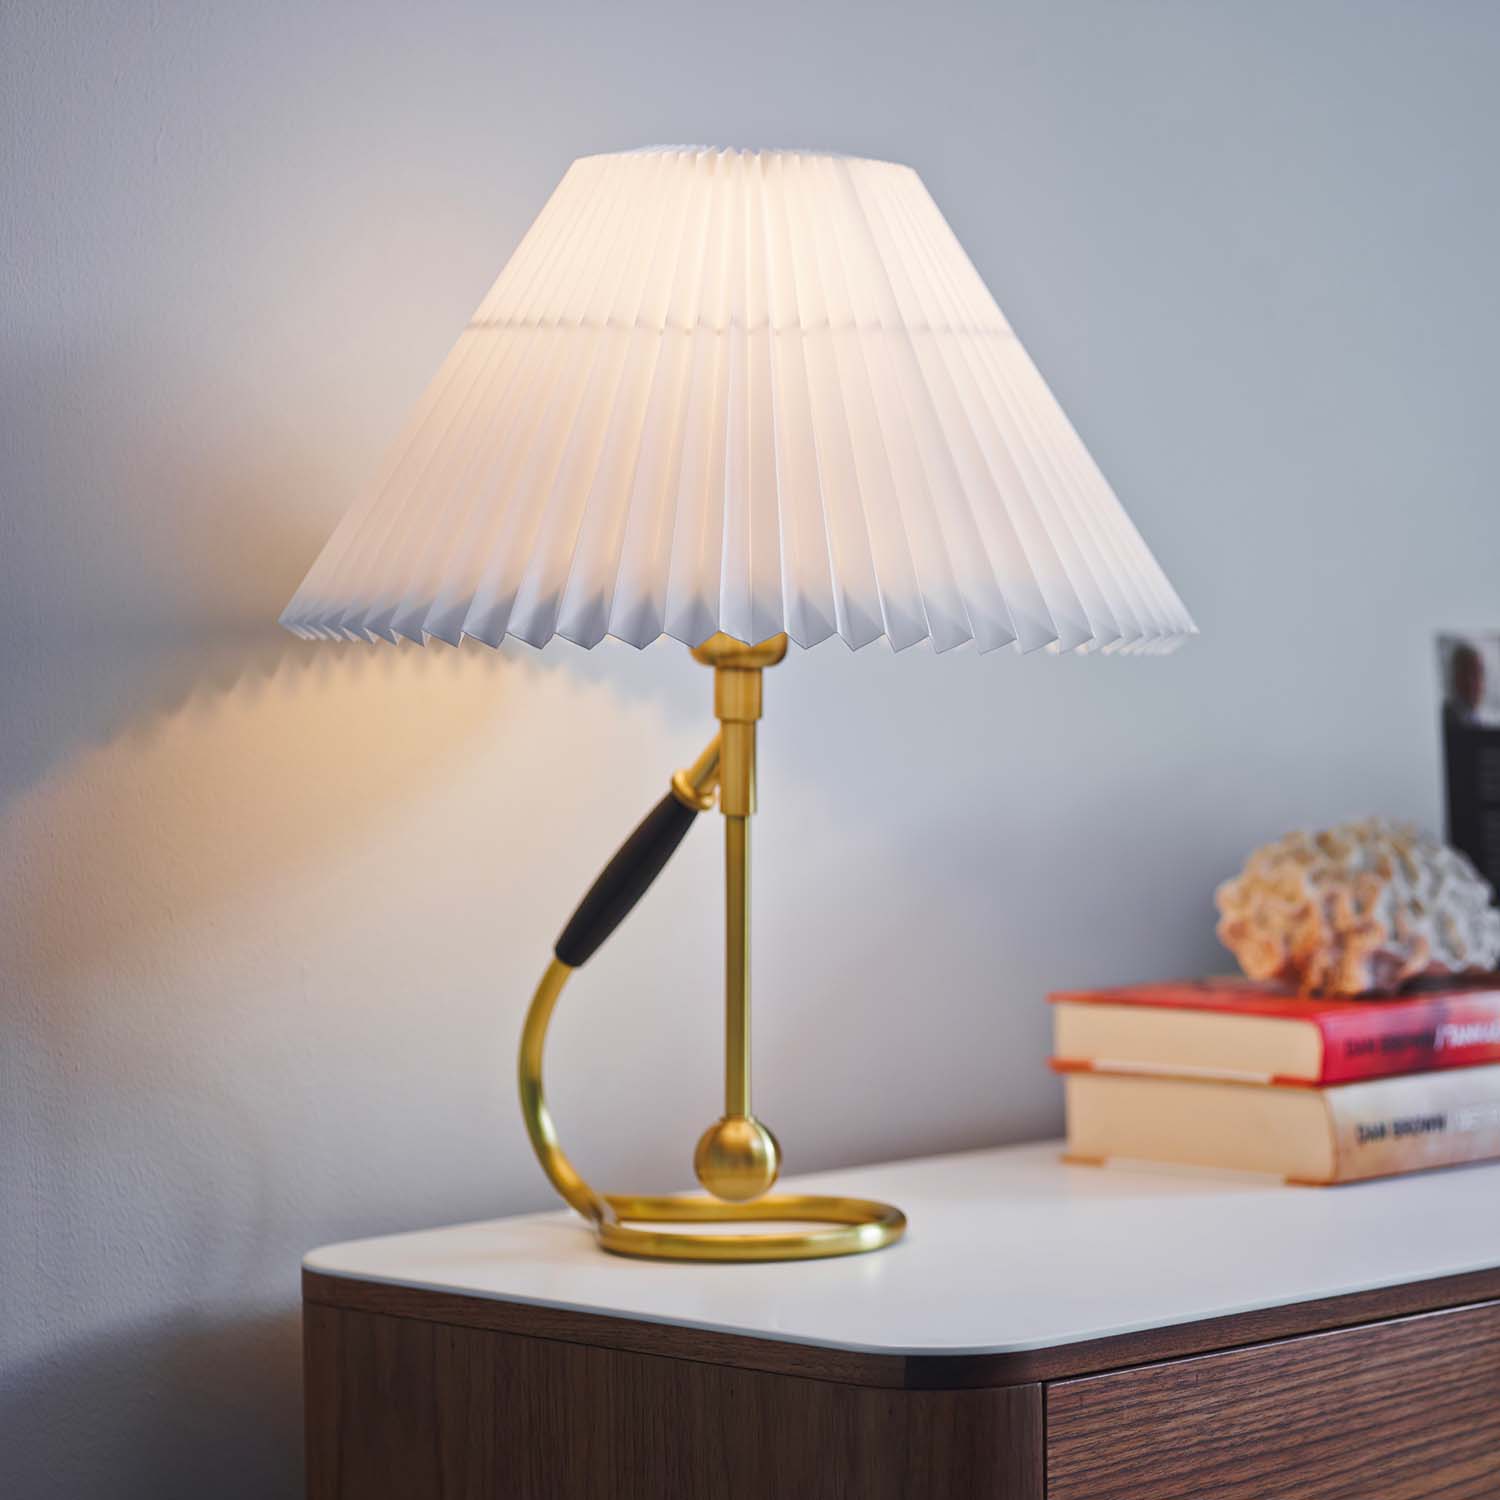 CLASSIC 306 - Handcrafted vintage bedside lamp